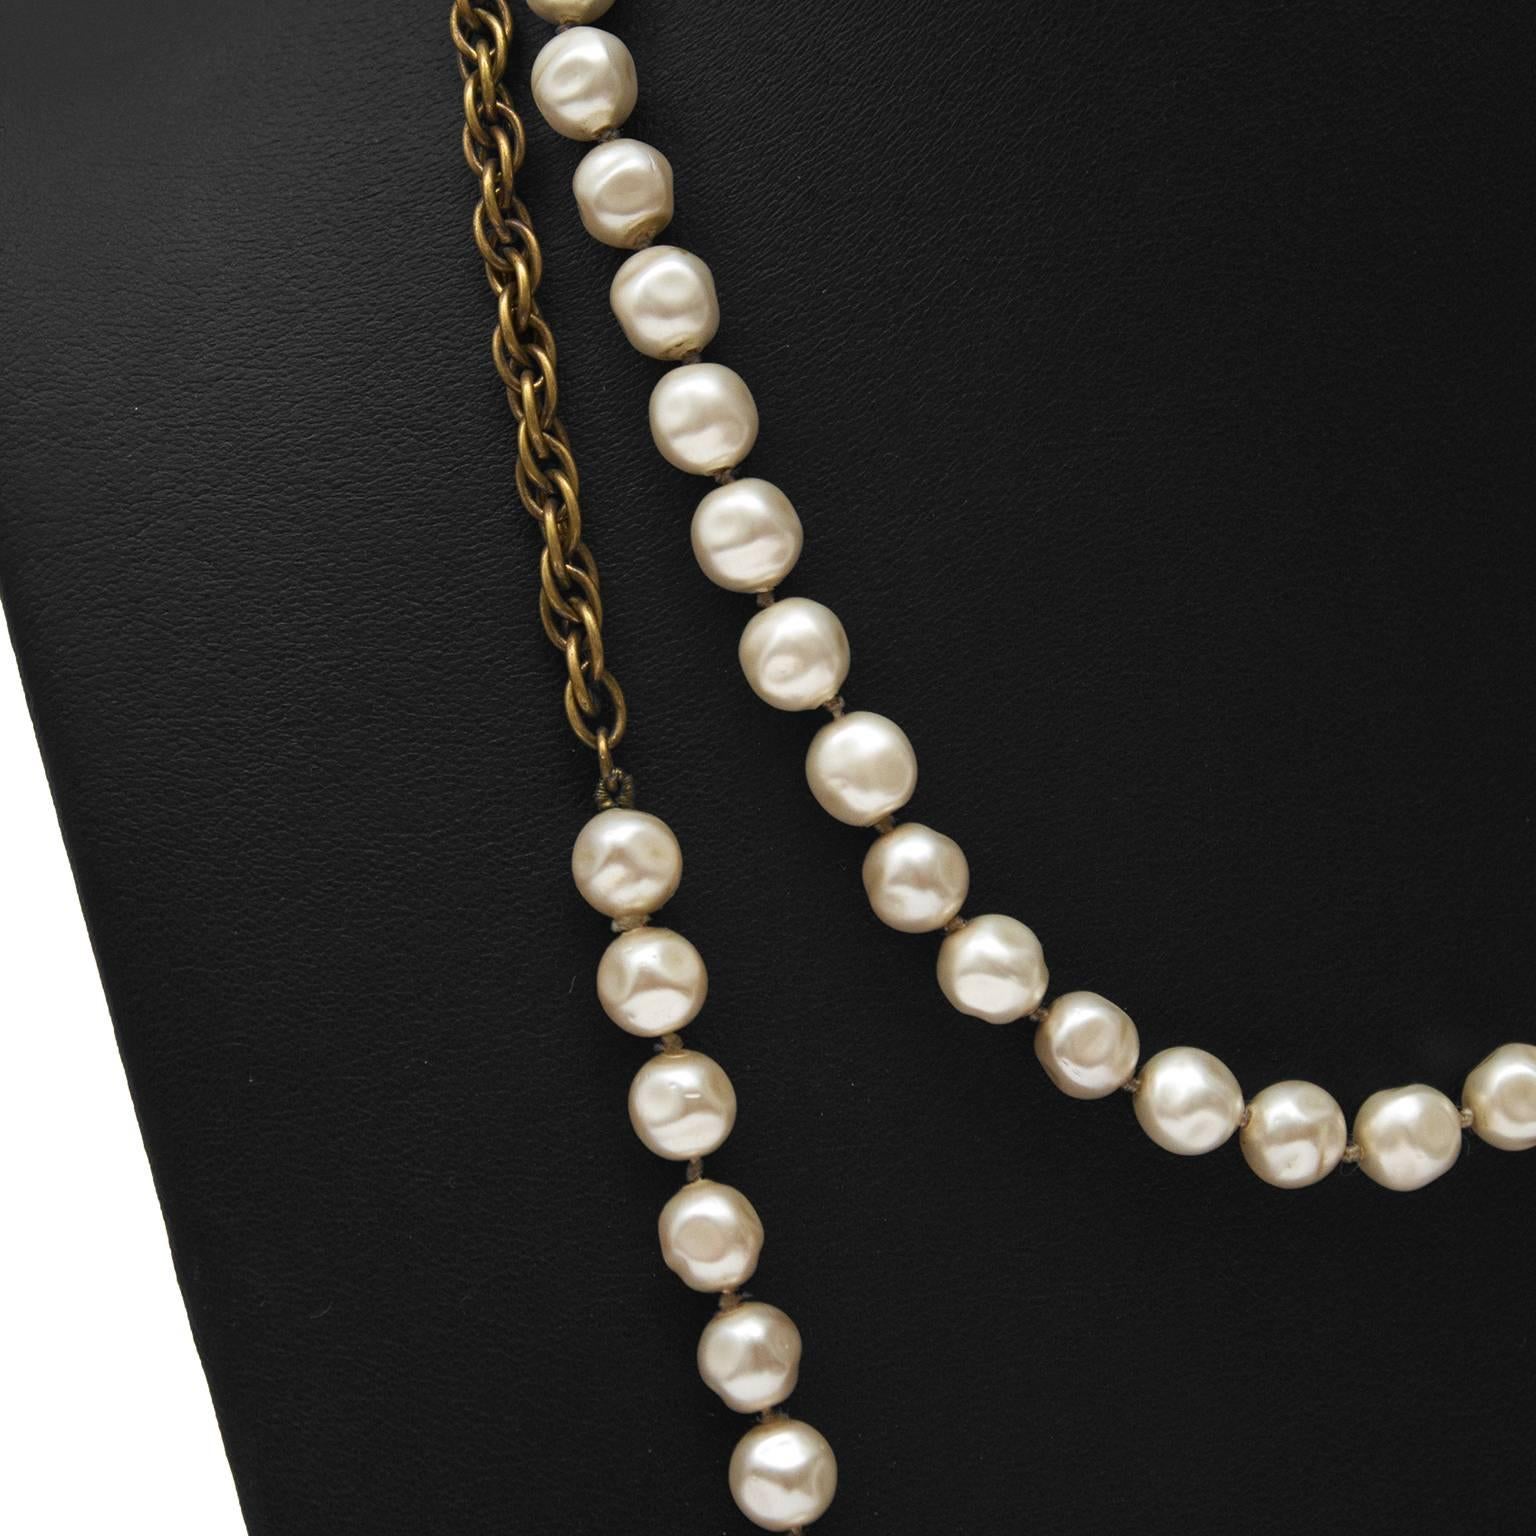 Chanel faux pearl and gold chain necklace from 1983. Two sections of white pearls along with two sections of french rope style chain make up this beautiful necklace. Long enough to be worn doubled. Octagonal tag attached marked CHANEL 1983. In